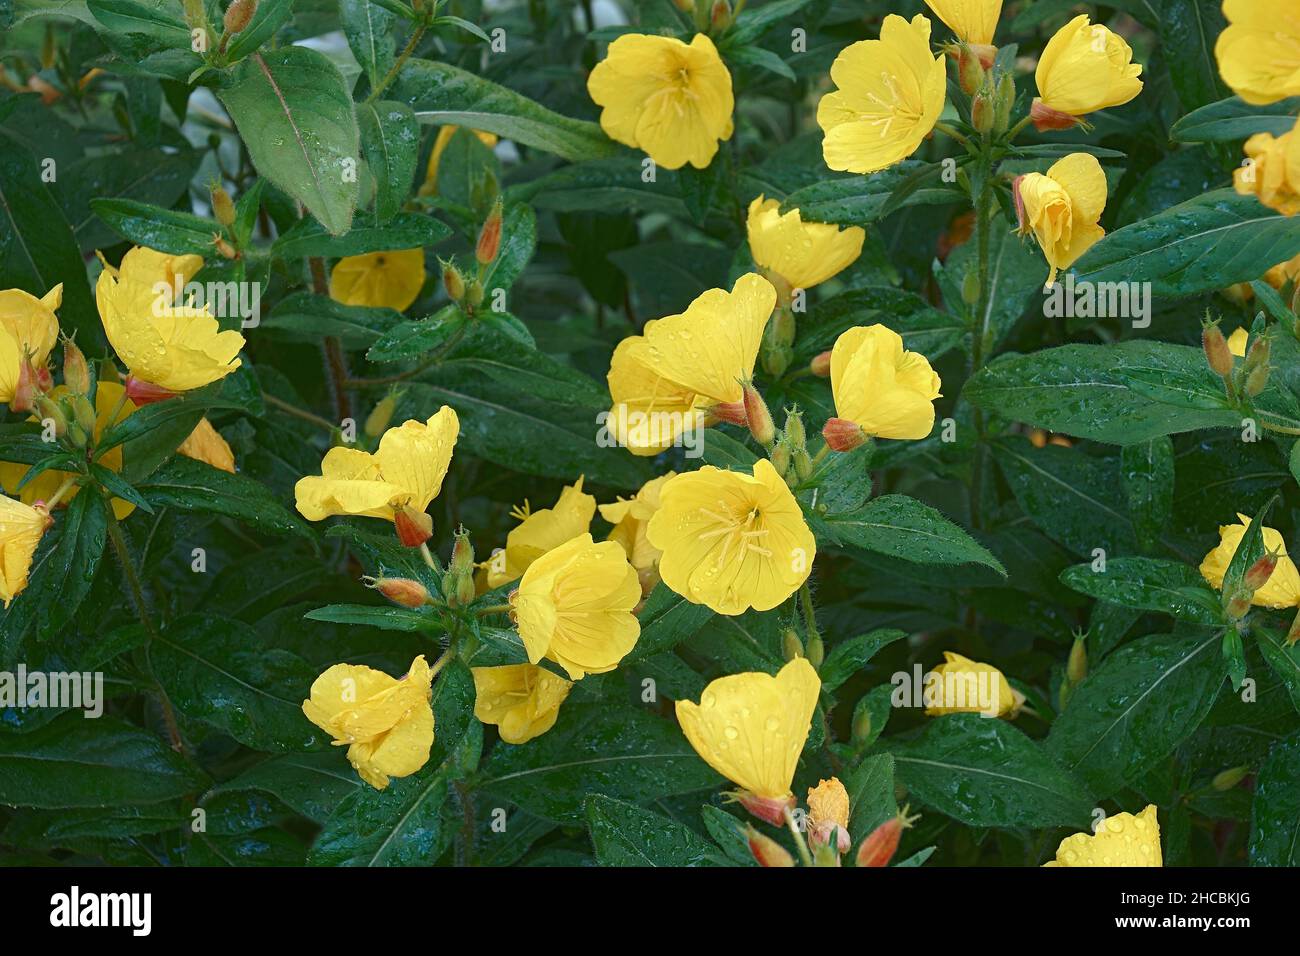 Common Evening primrose (Oenothera biennis). Called Evening star, Sundrop, Weedy evening primrose, German rampion, Hog weed and Fever-plant also Stock Photo